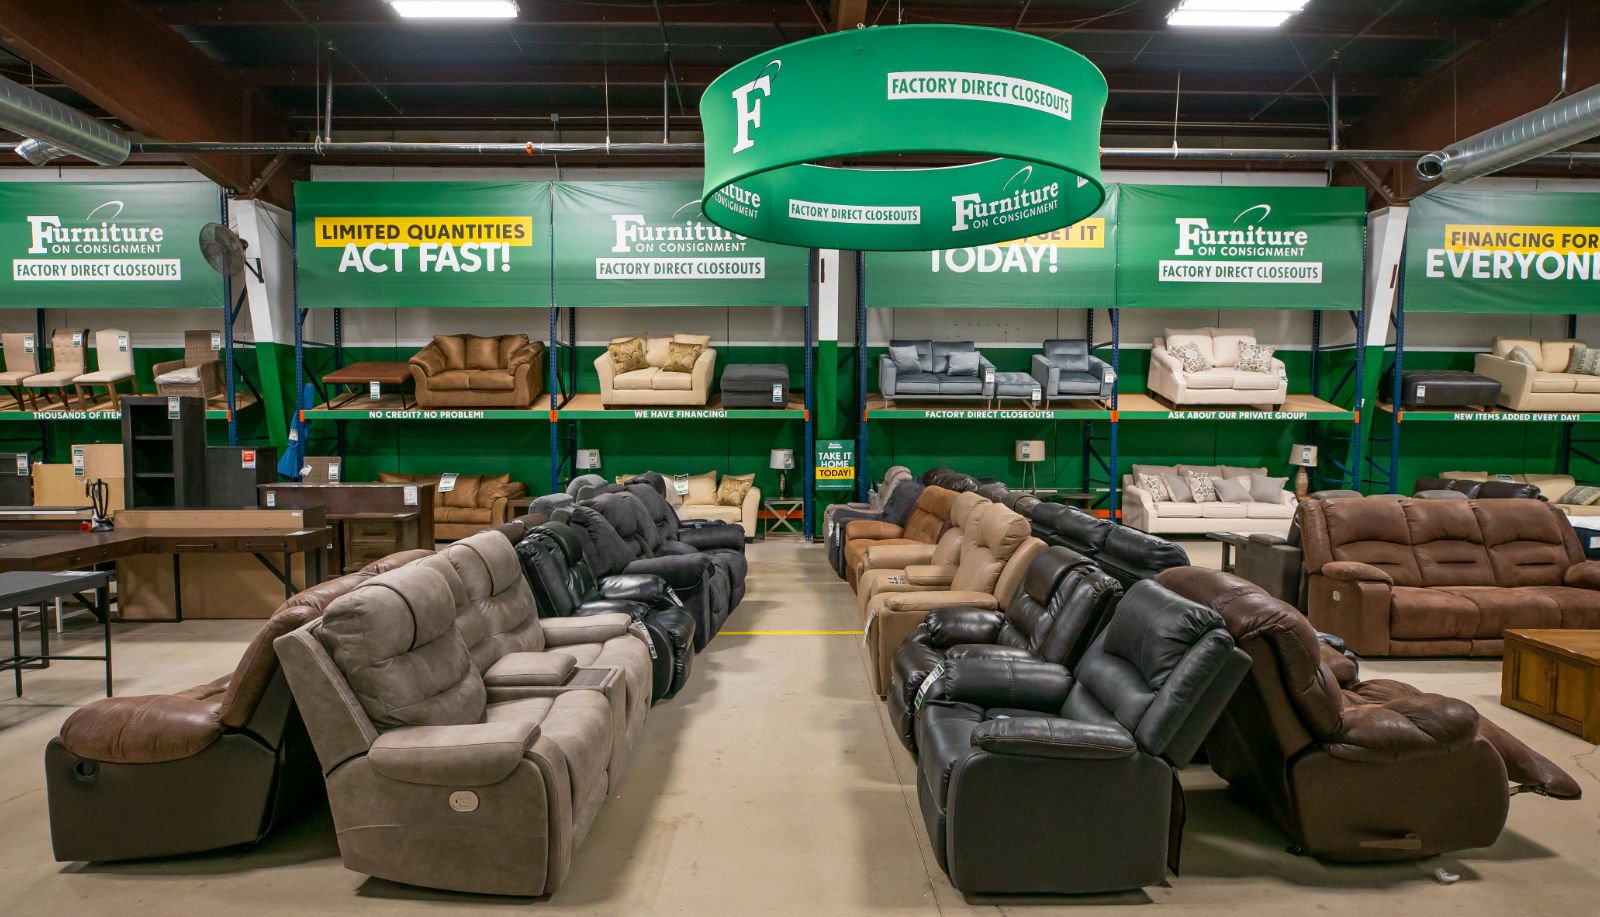 Furniture On Consignment Factory Direct Closeouts